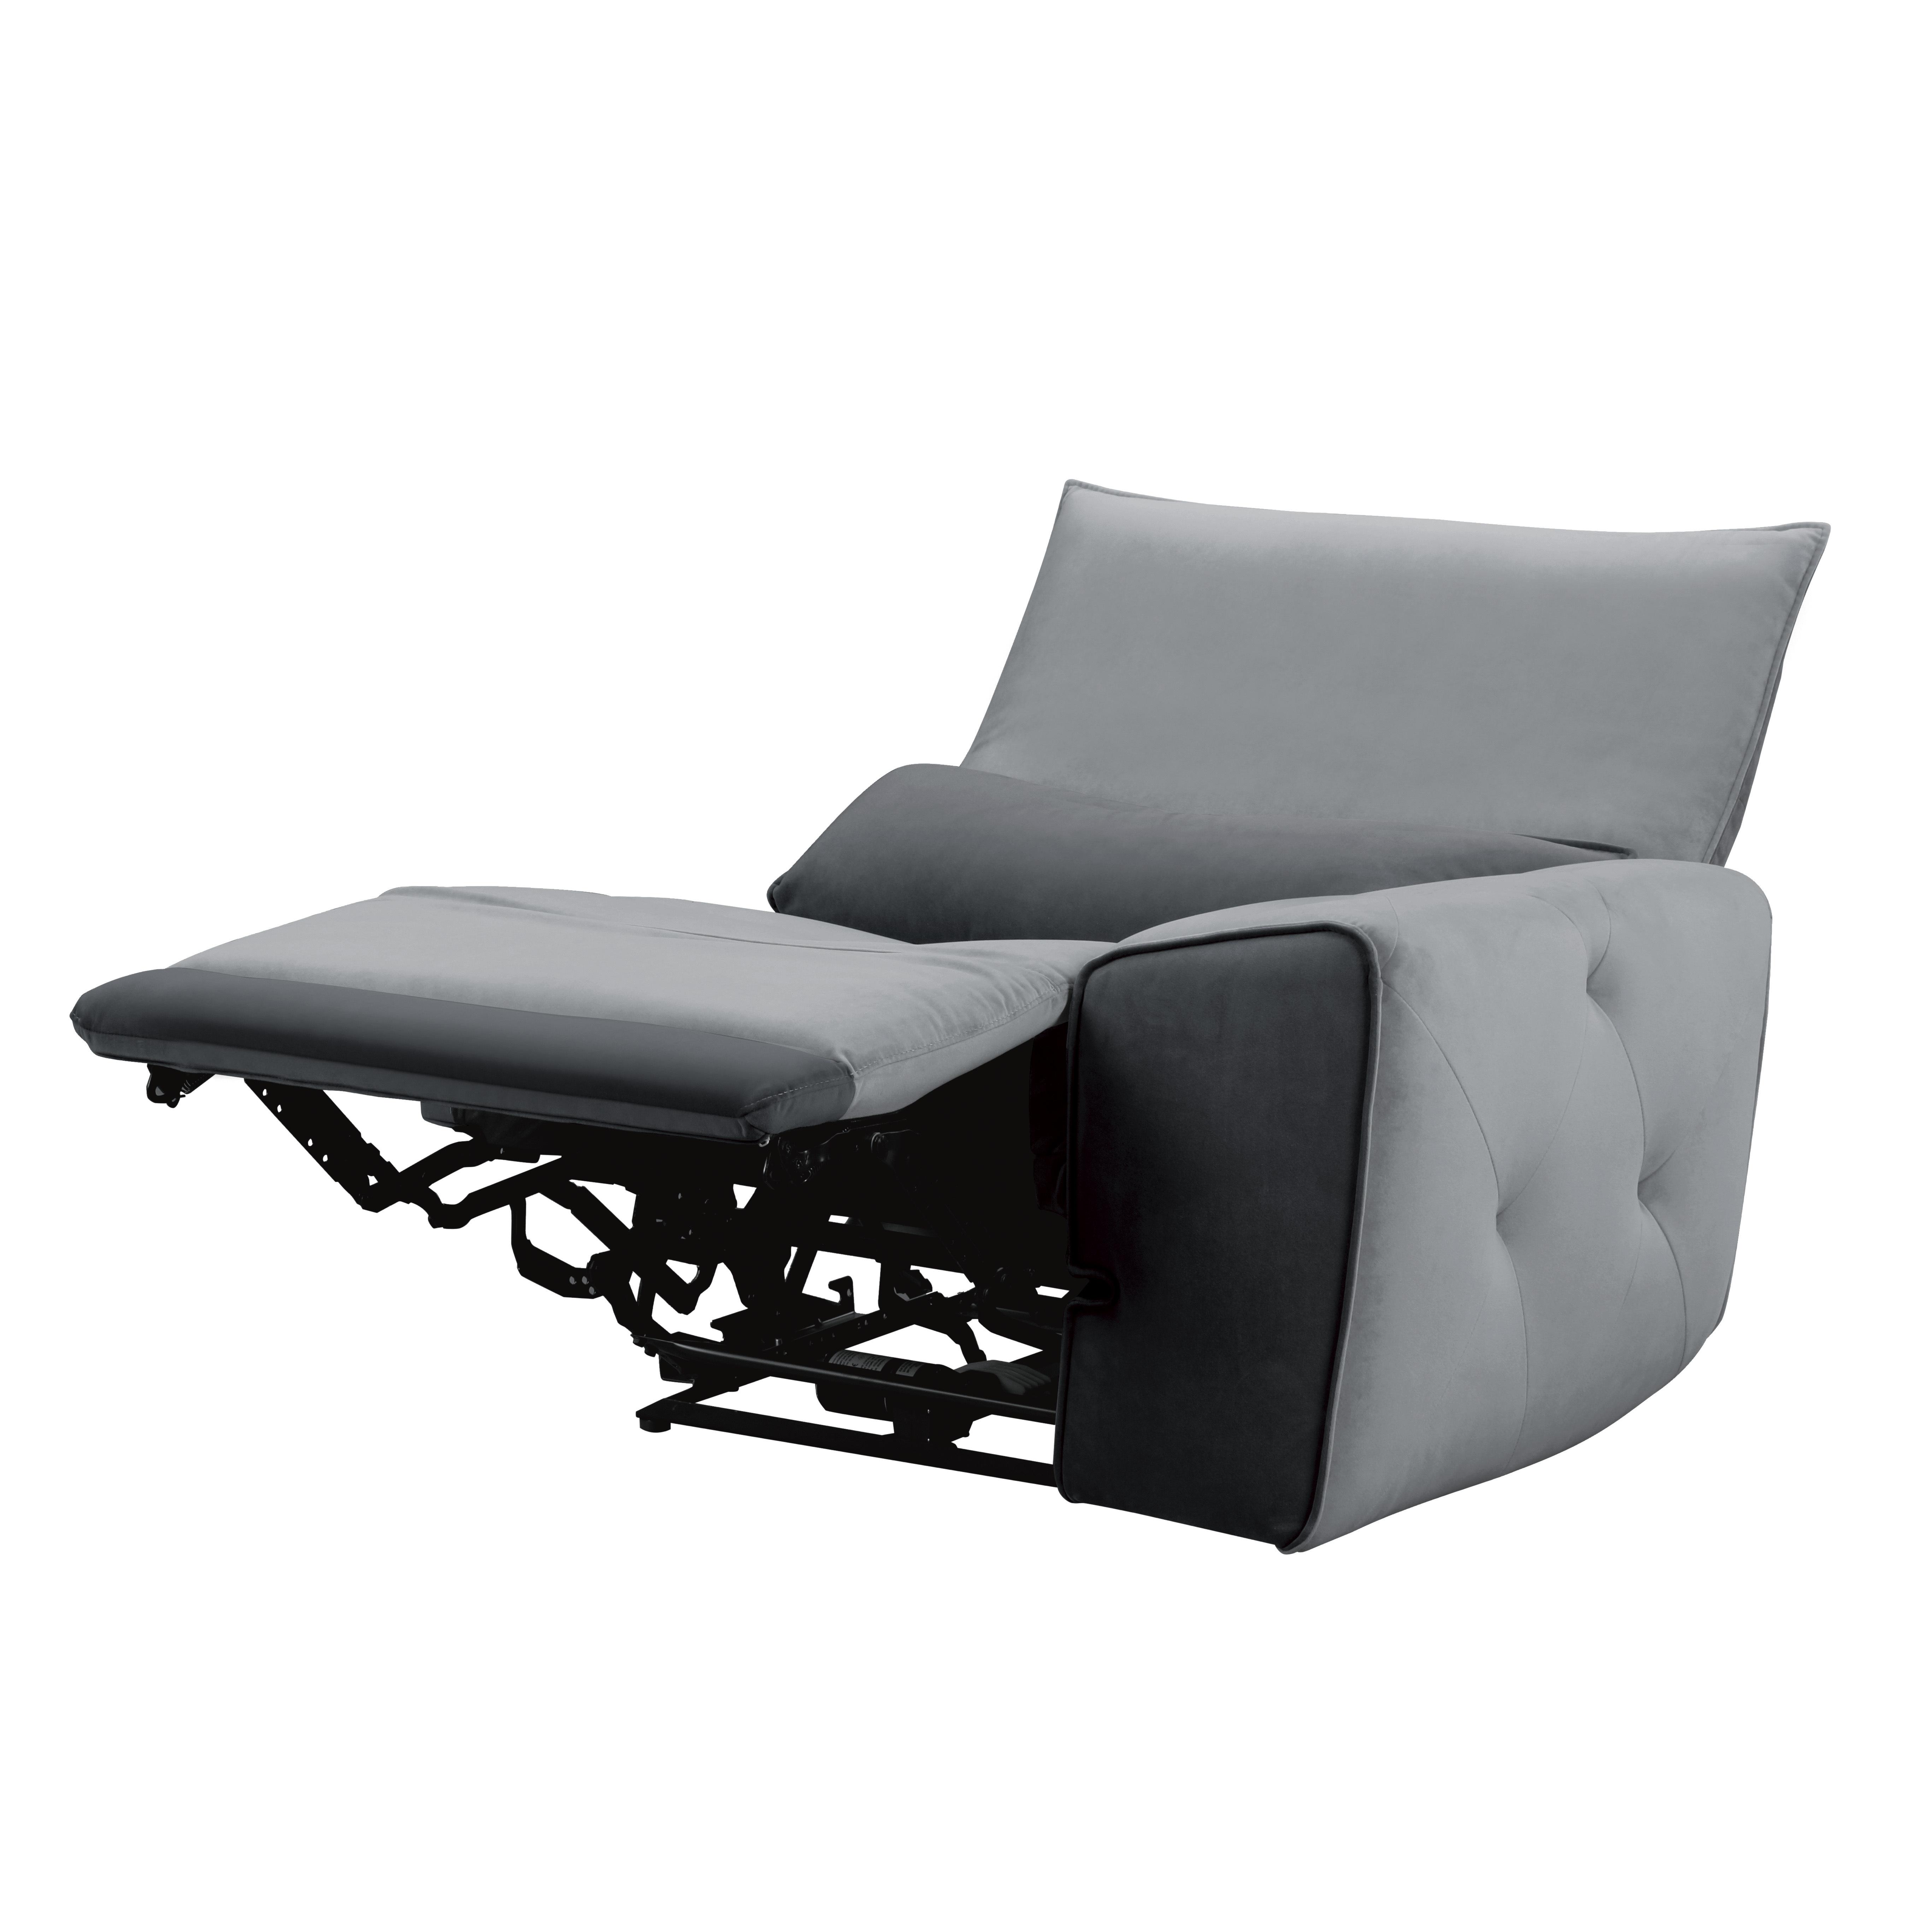 

    
Homelegance 9459GY-RRPW Helix Power Reclining Chair Gray 9459GY-RRPW
